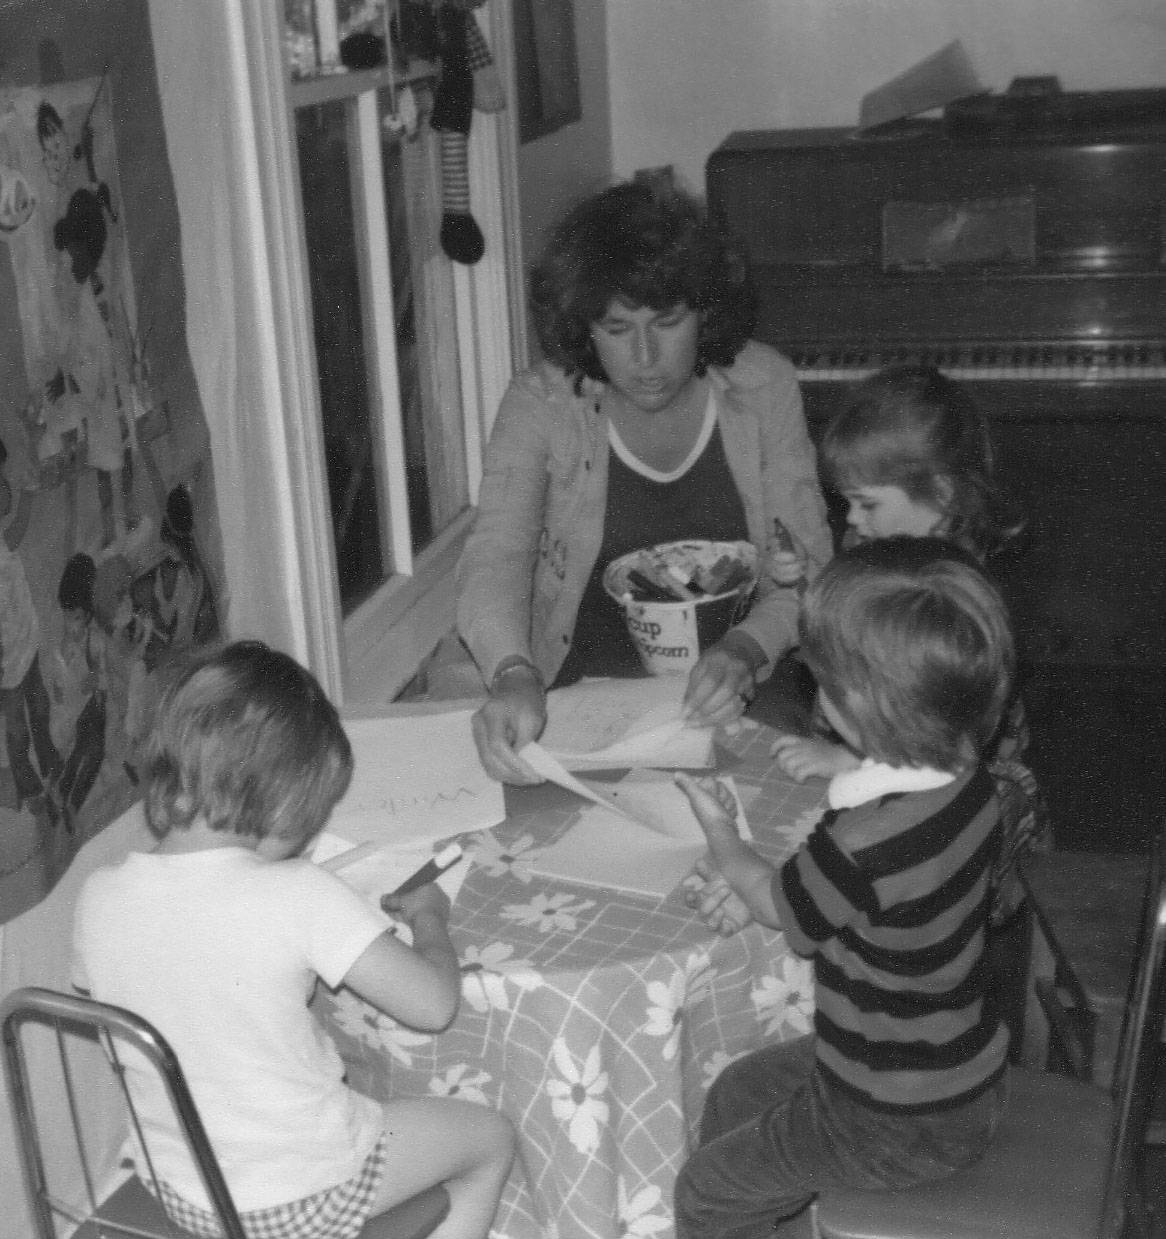 Sandy Starr with students in the front room of the Lavender farmhouse, which today still houses the Children’s House Preschool.